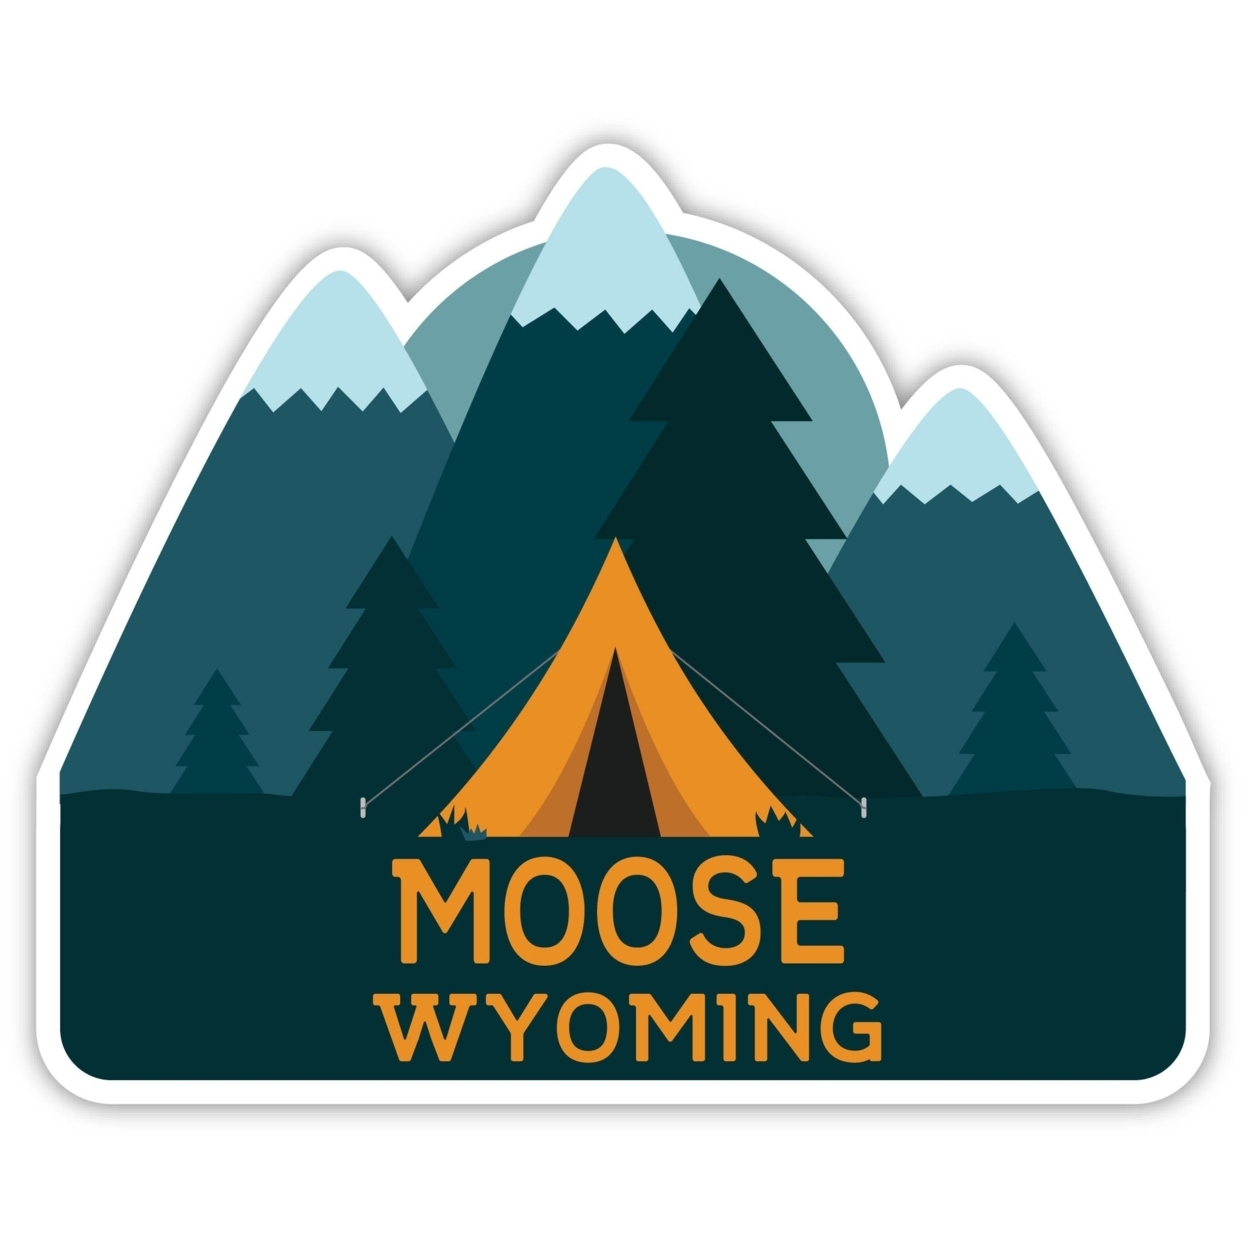 Moose Wyoming Souvenir Decorative Stickers (Choose Theme And Size) - Single Unit, 4-Inch, Tent